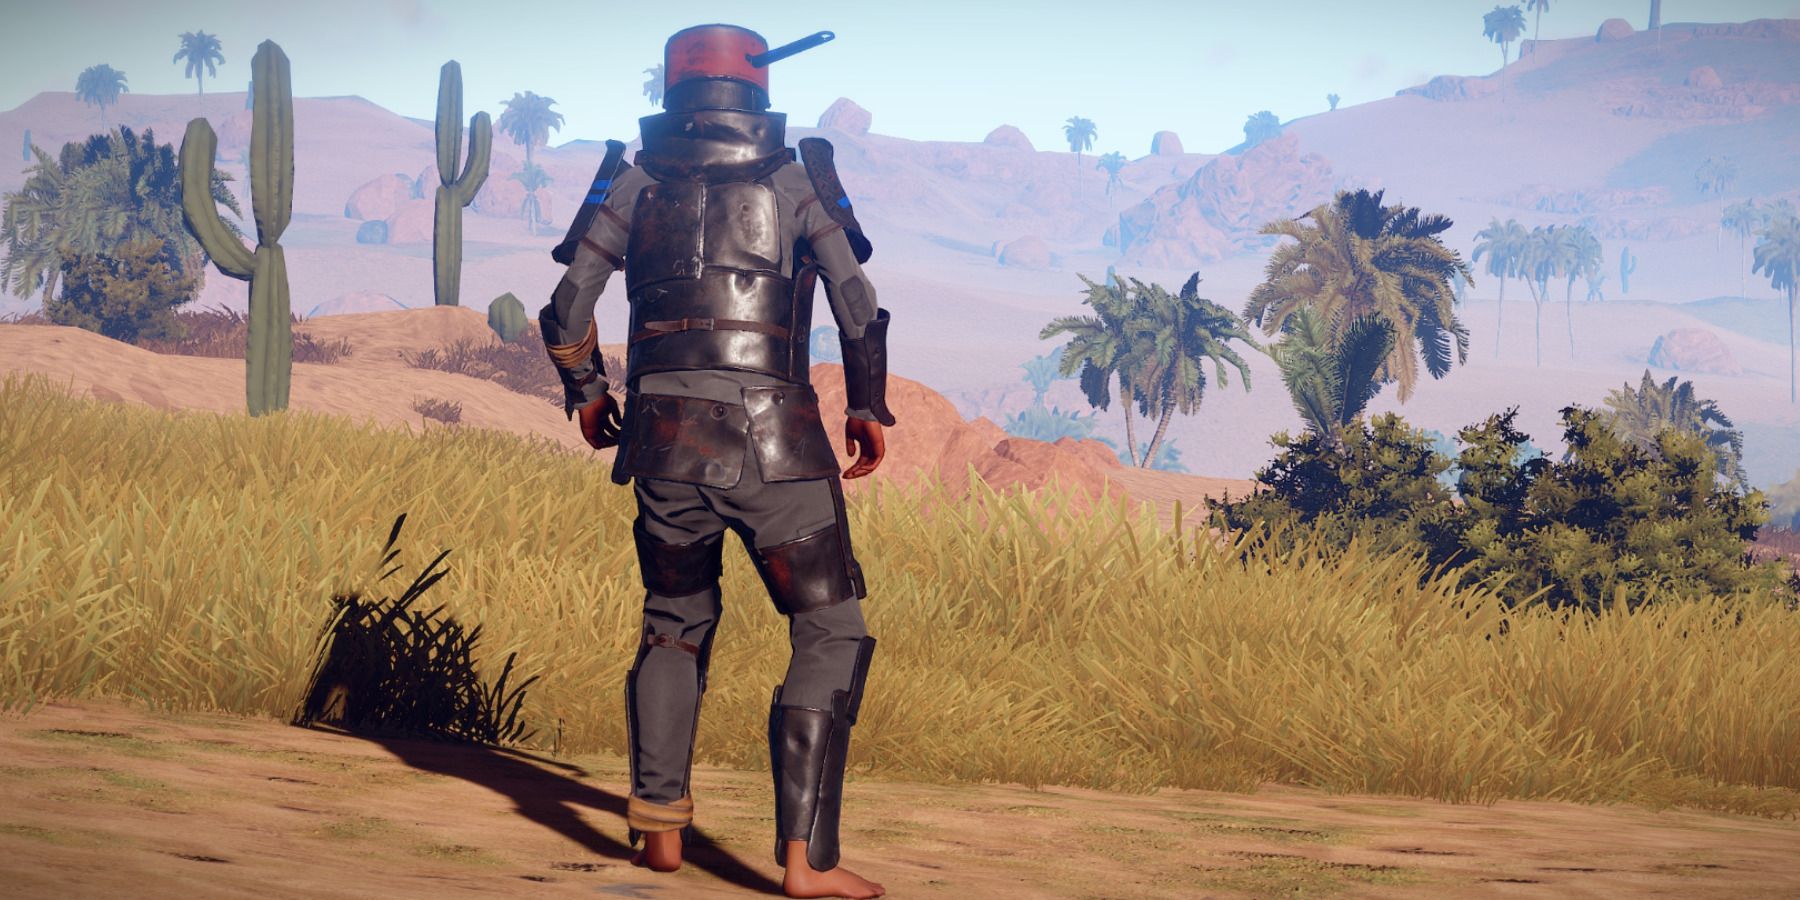 Players using the Heavy Armor from Rust.